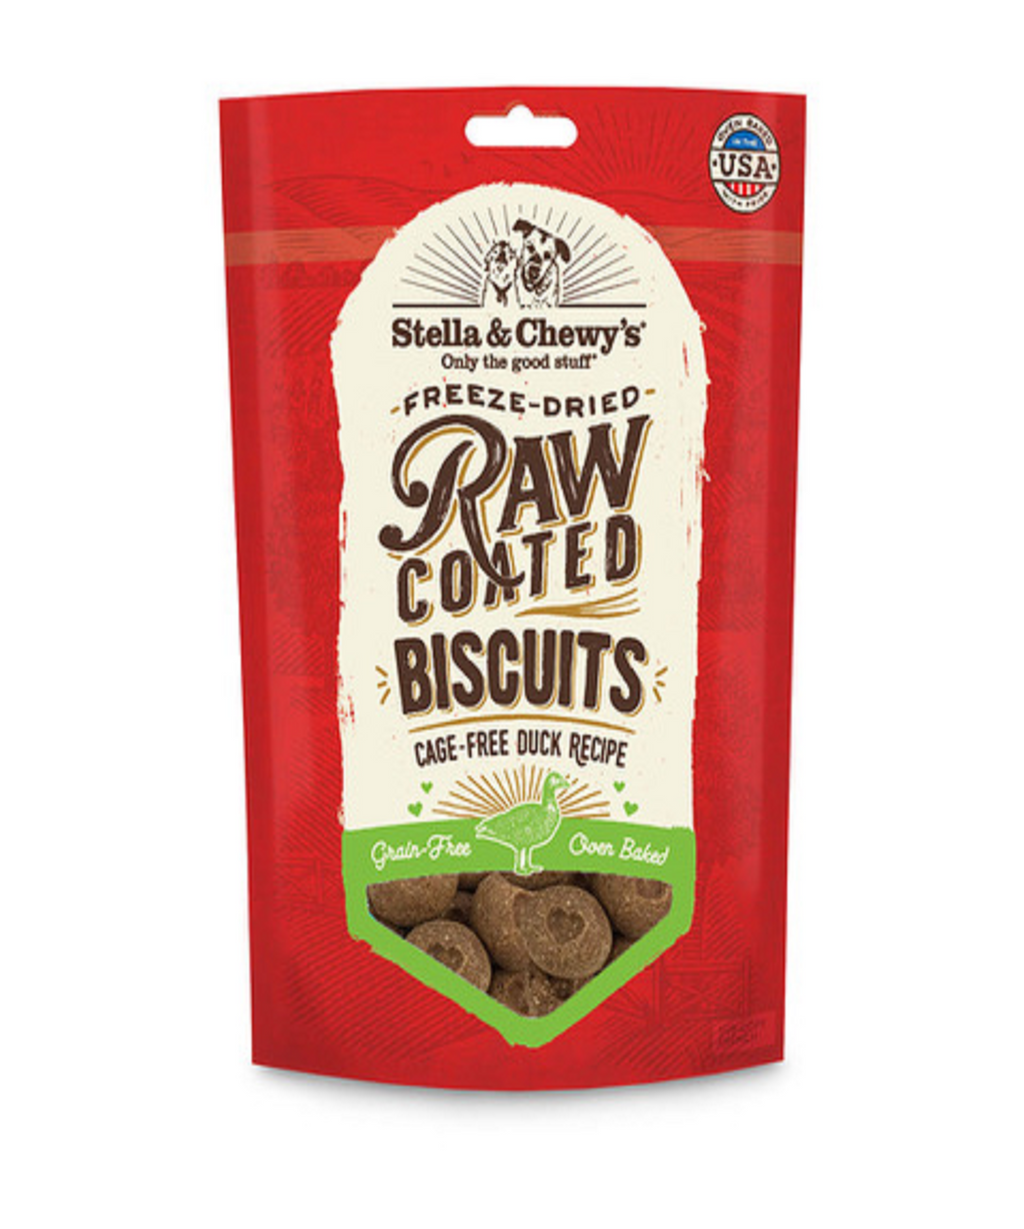  Raw Coated Biscuits